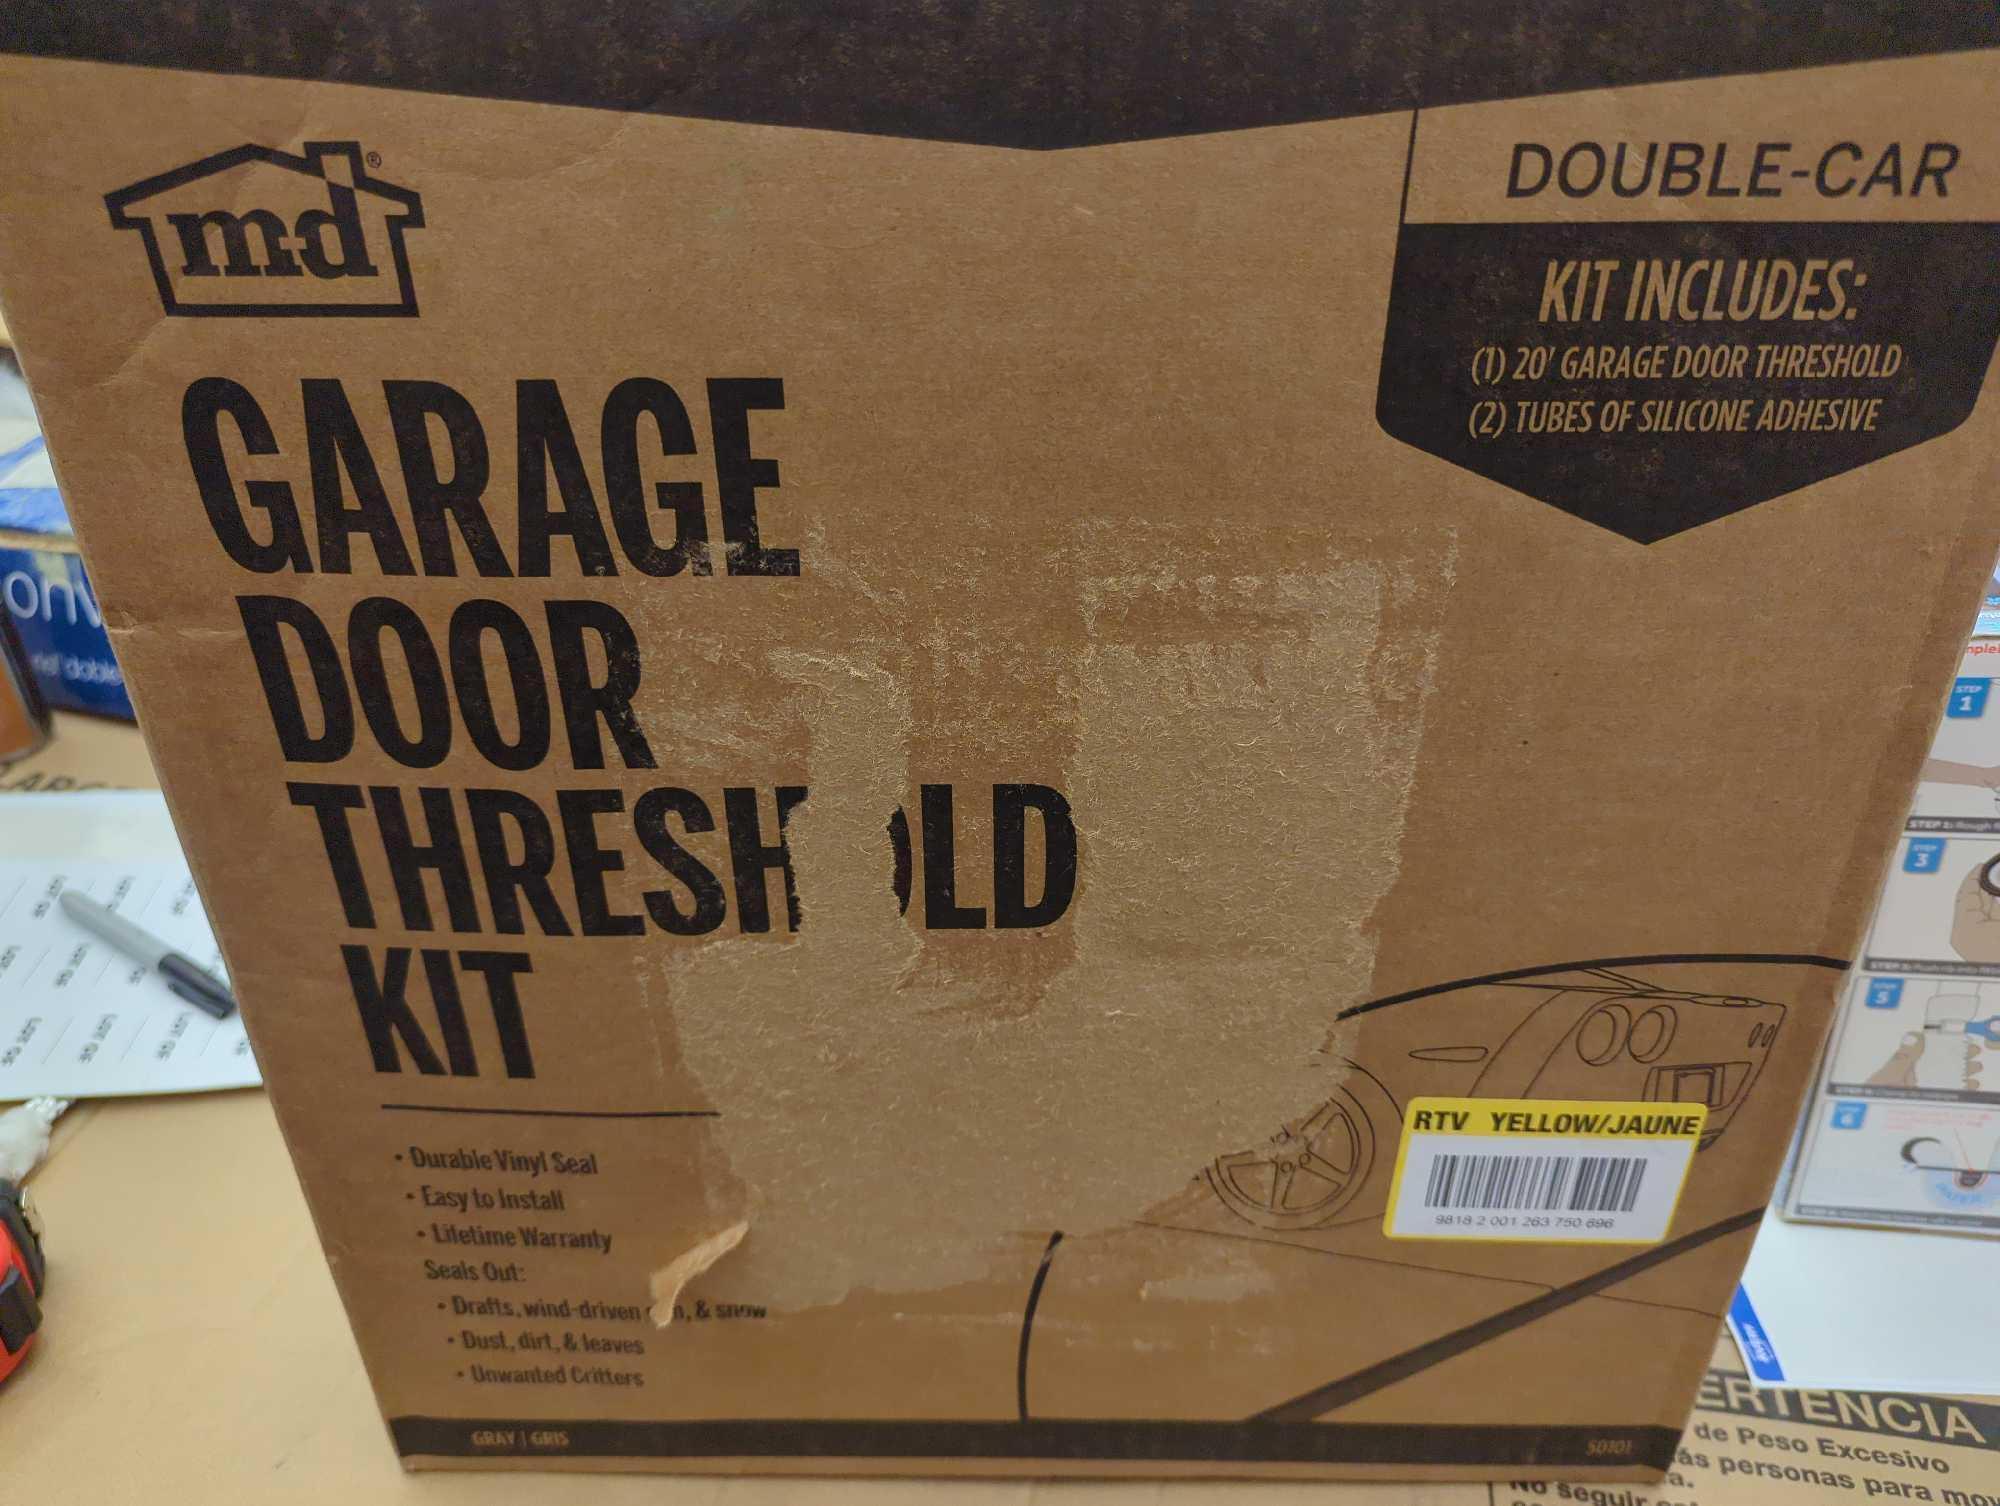 M-D Building Products 20 ft. Garage Door Bottom Seal Kit, Appears to be New in Factory Sealed Box